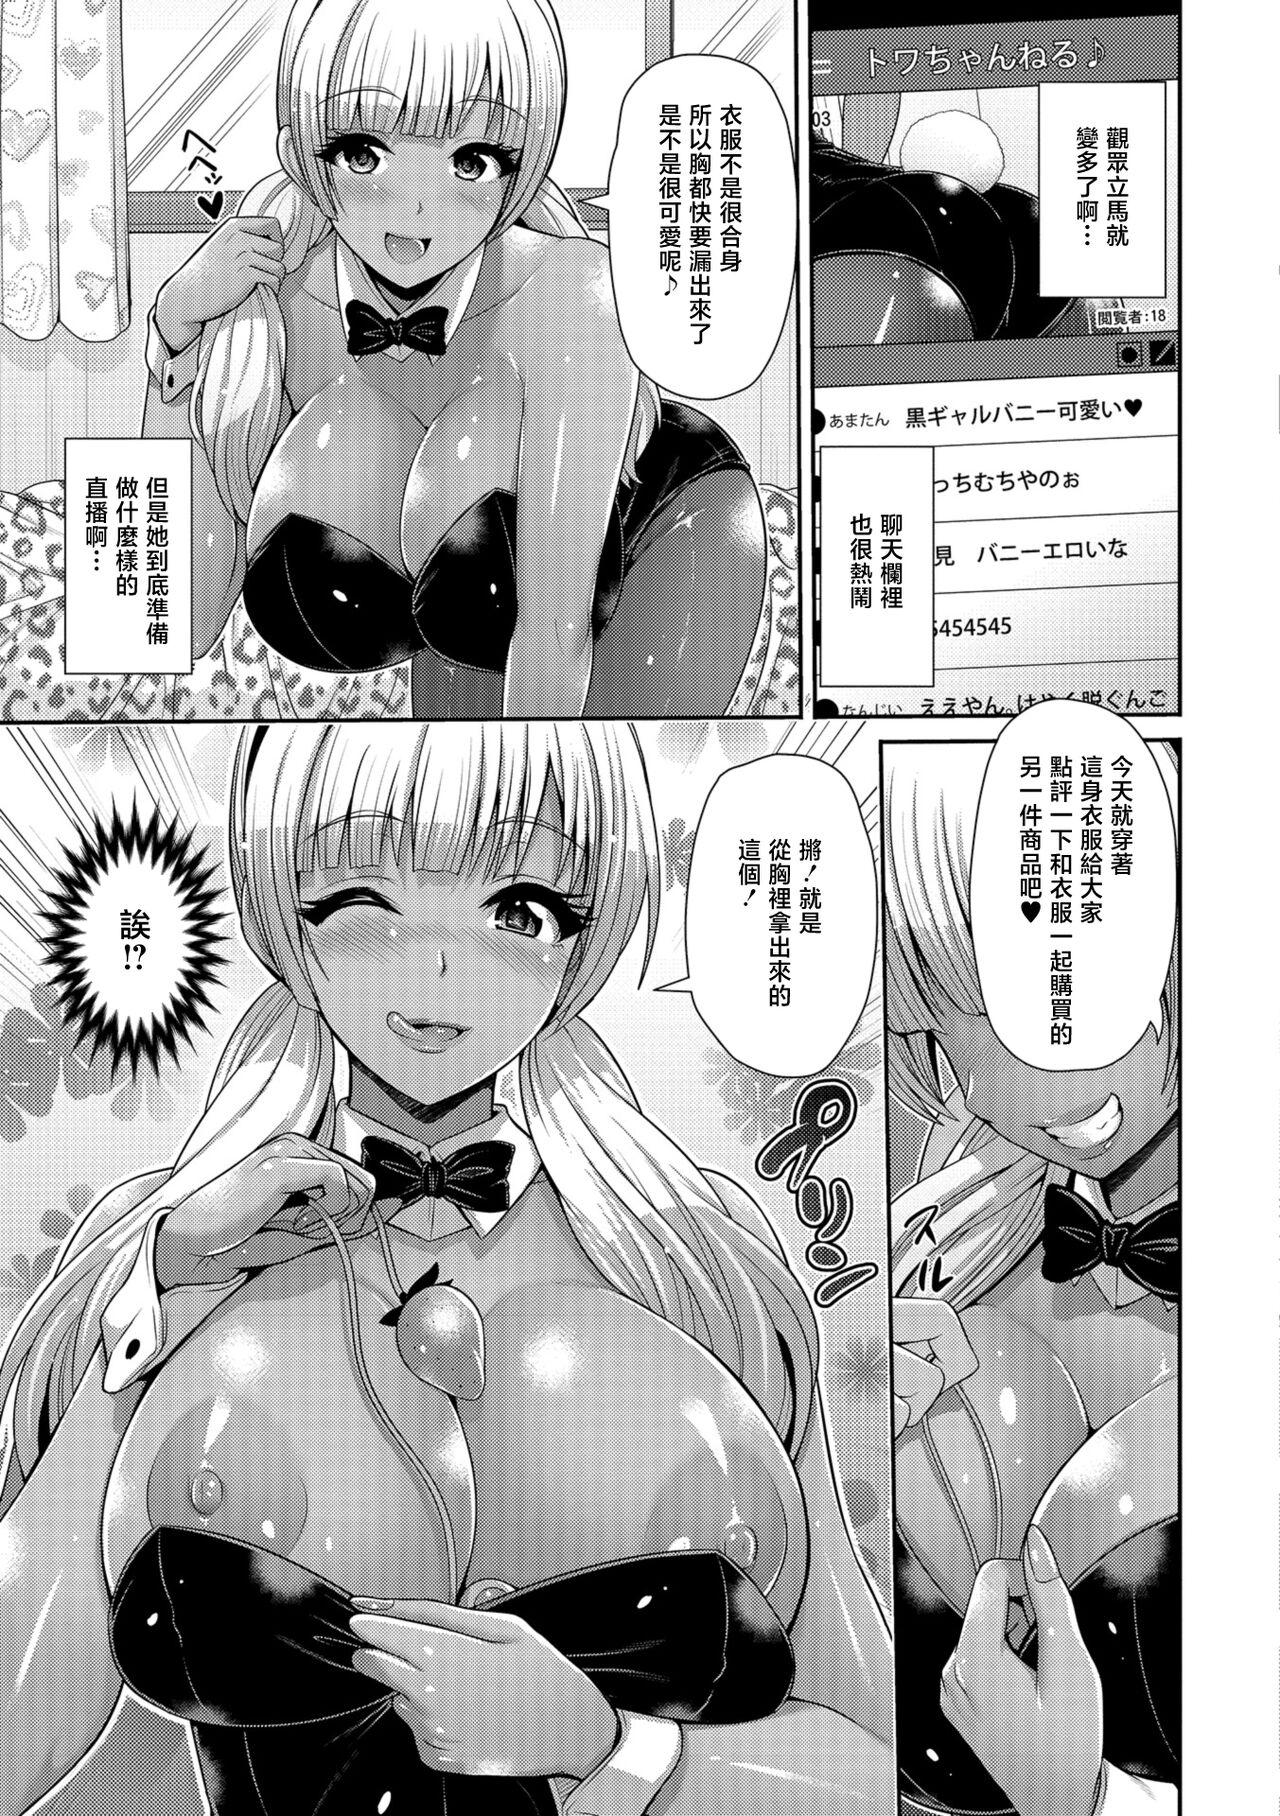 Small Tits 黒ギャルTUBERエロ配信デビュー! Tiny Titties - Picture 3